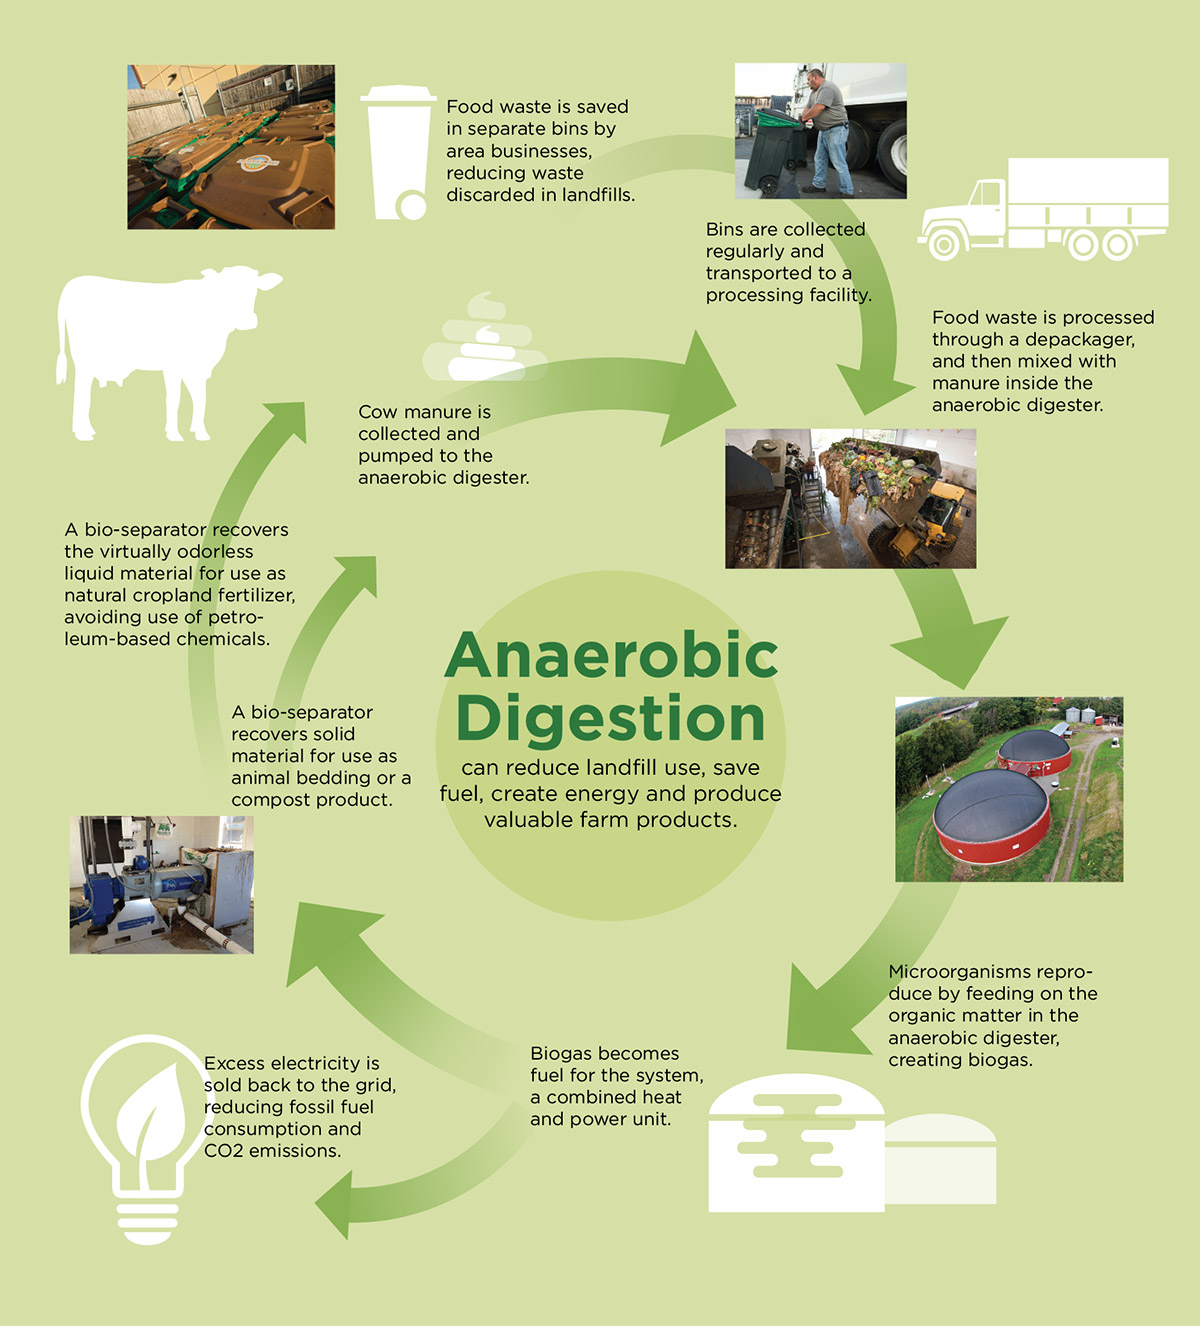 Infographic outlining the anaerobic digestion process and cycle.